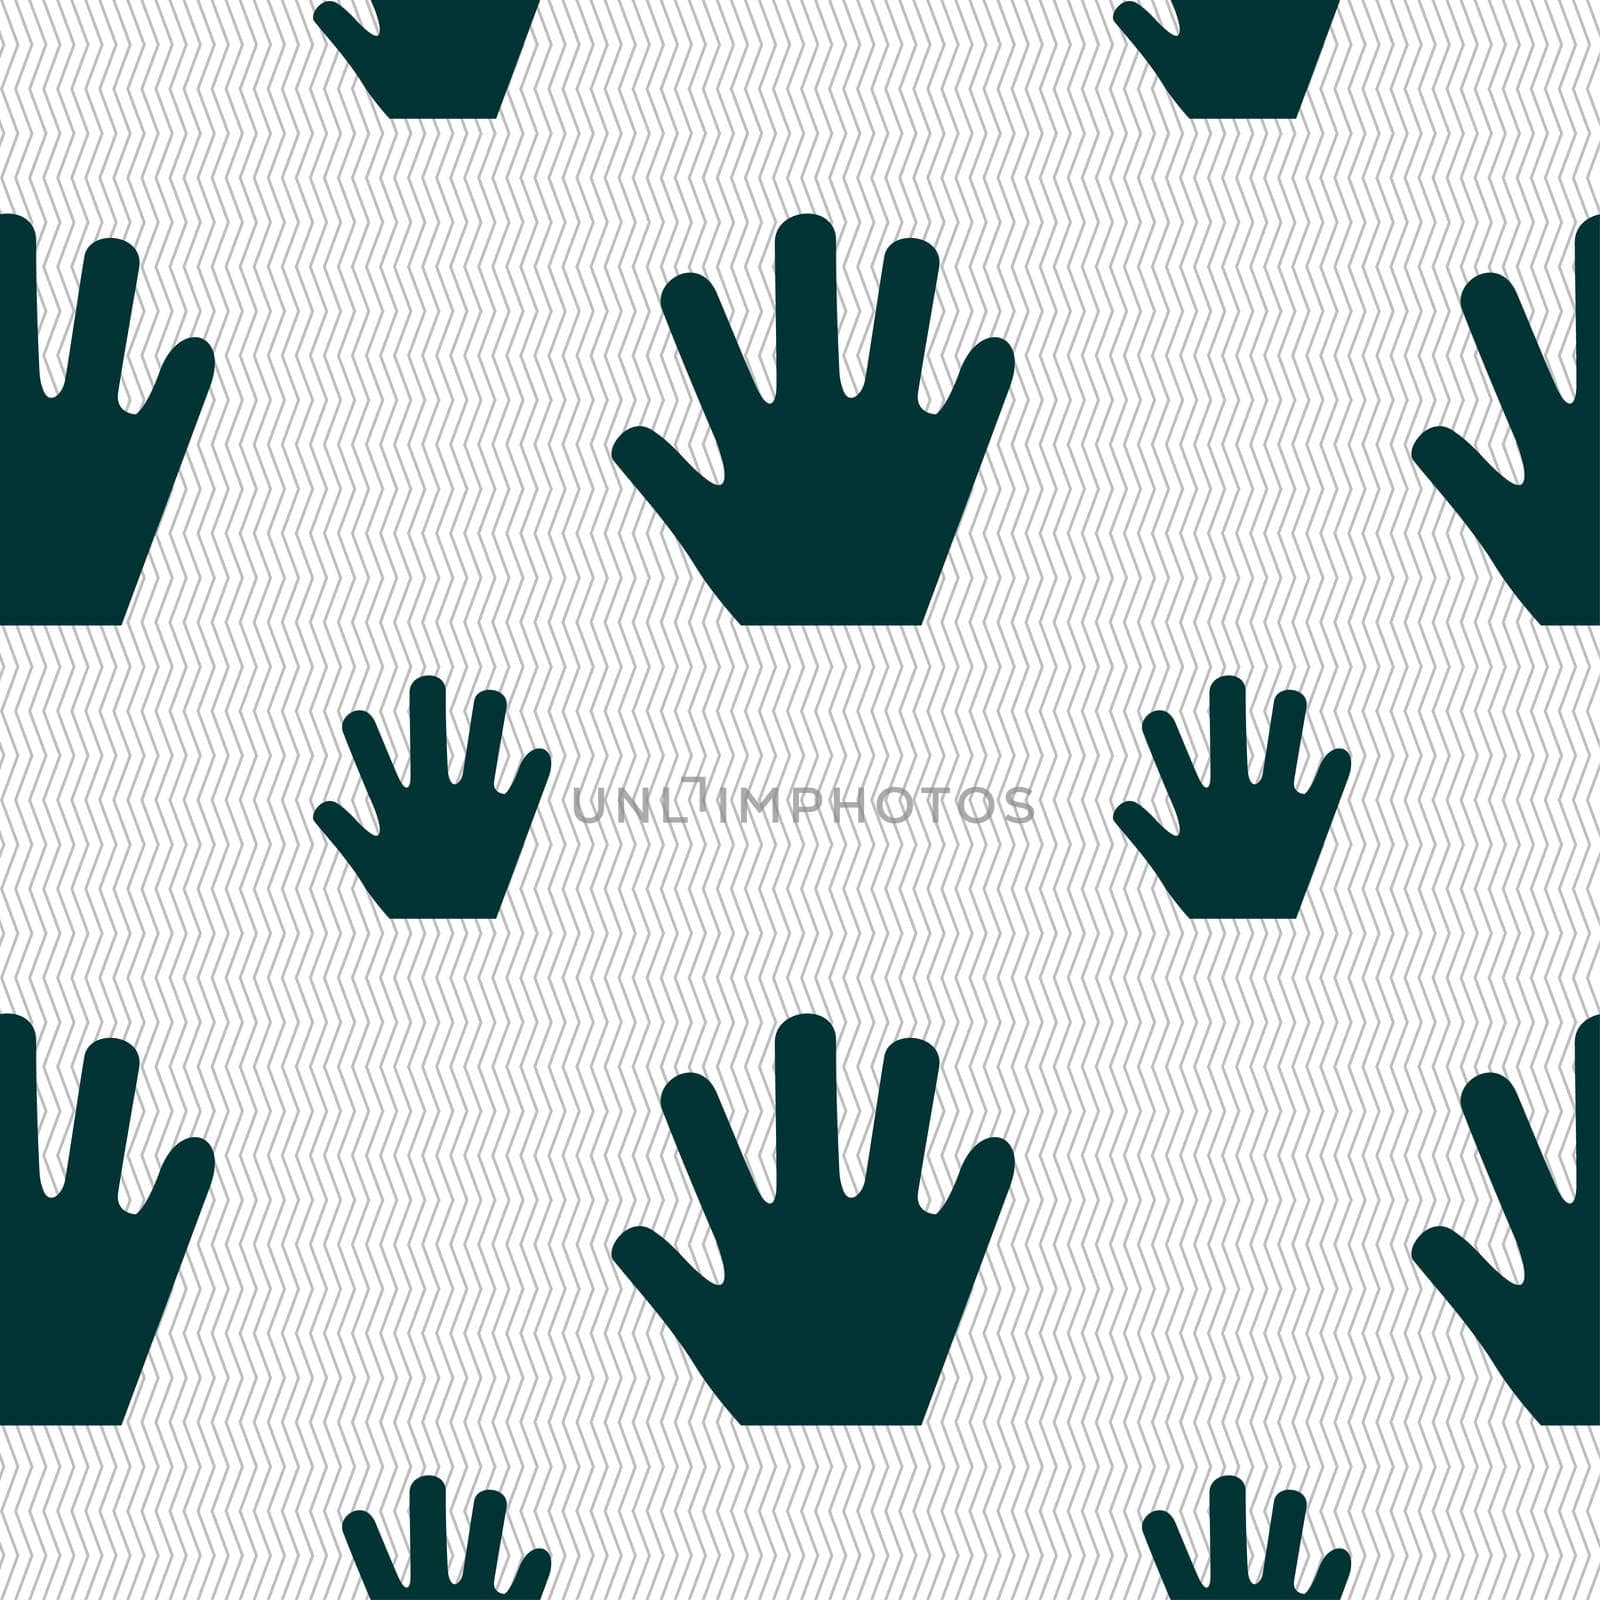 Hand icon sign. Seamless pattern with geometric texture. illustration